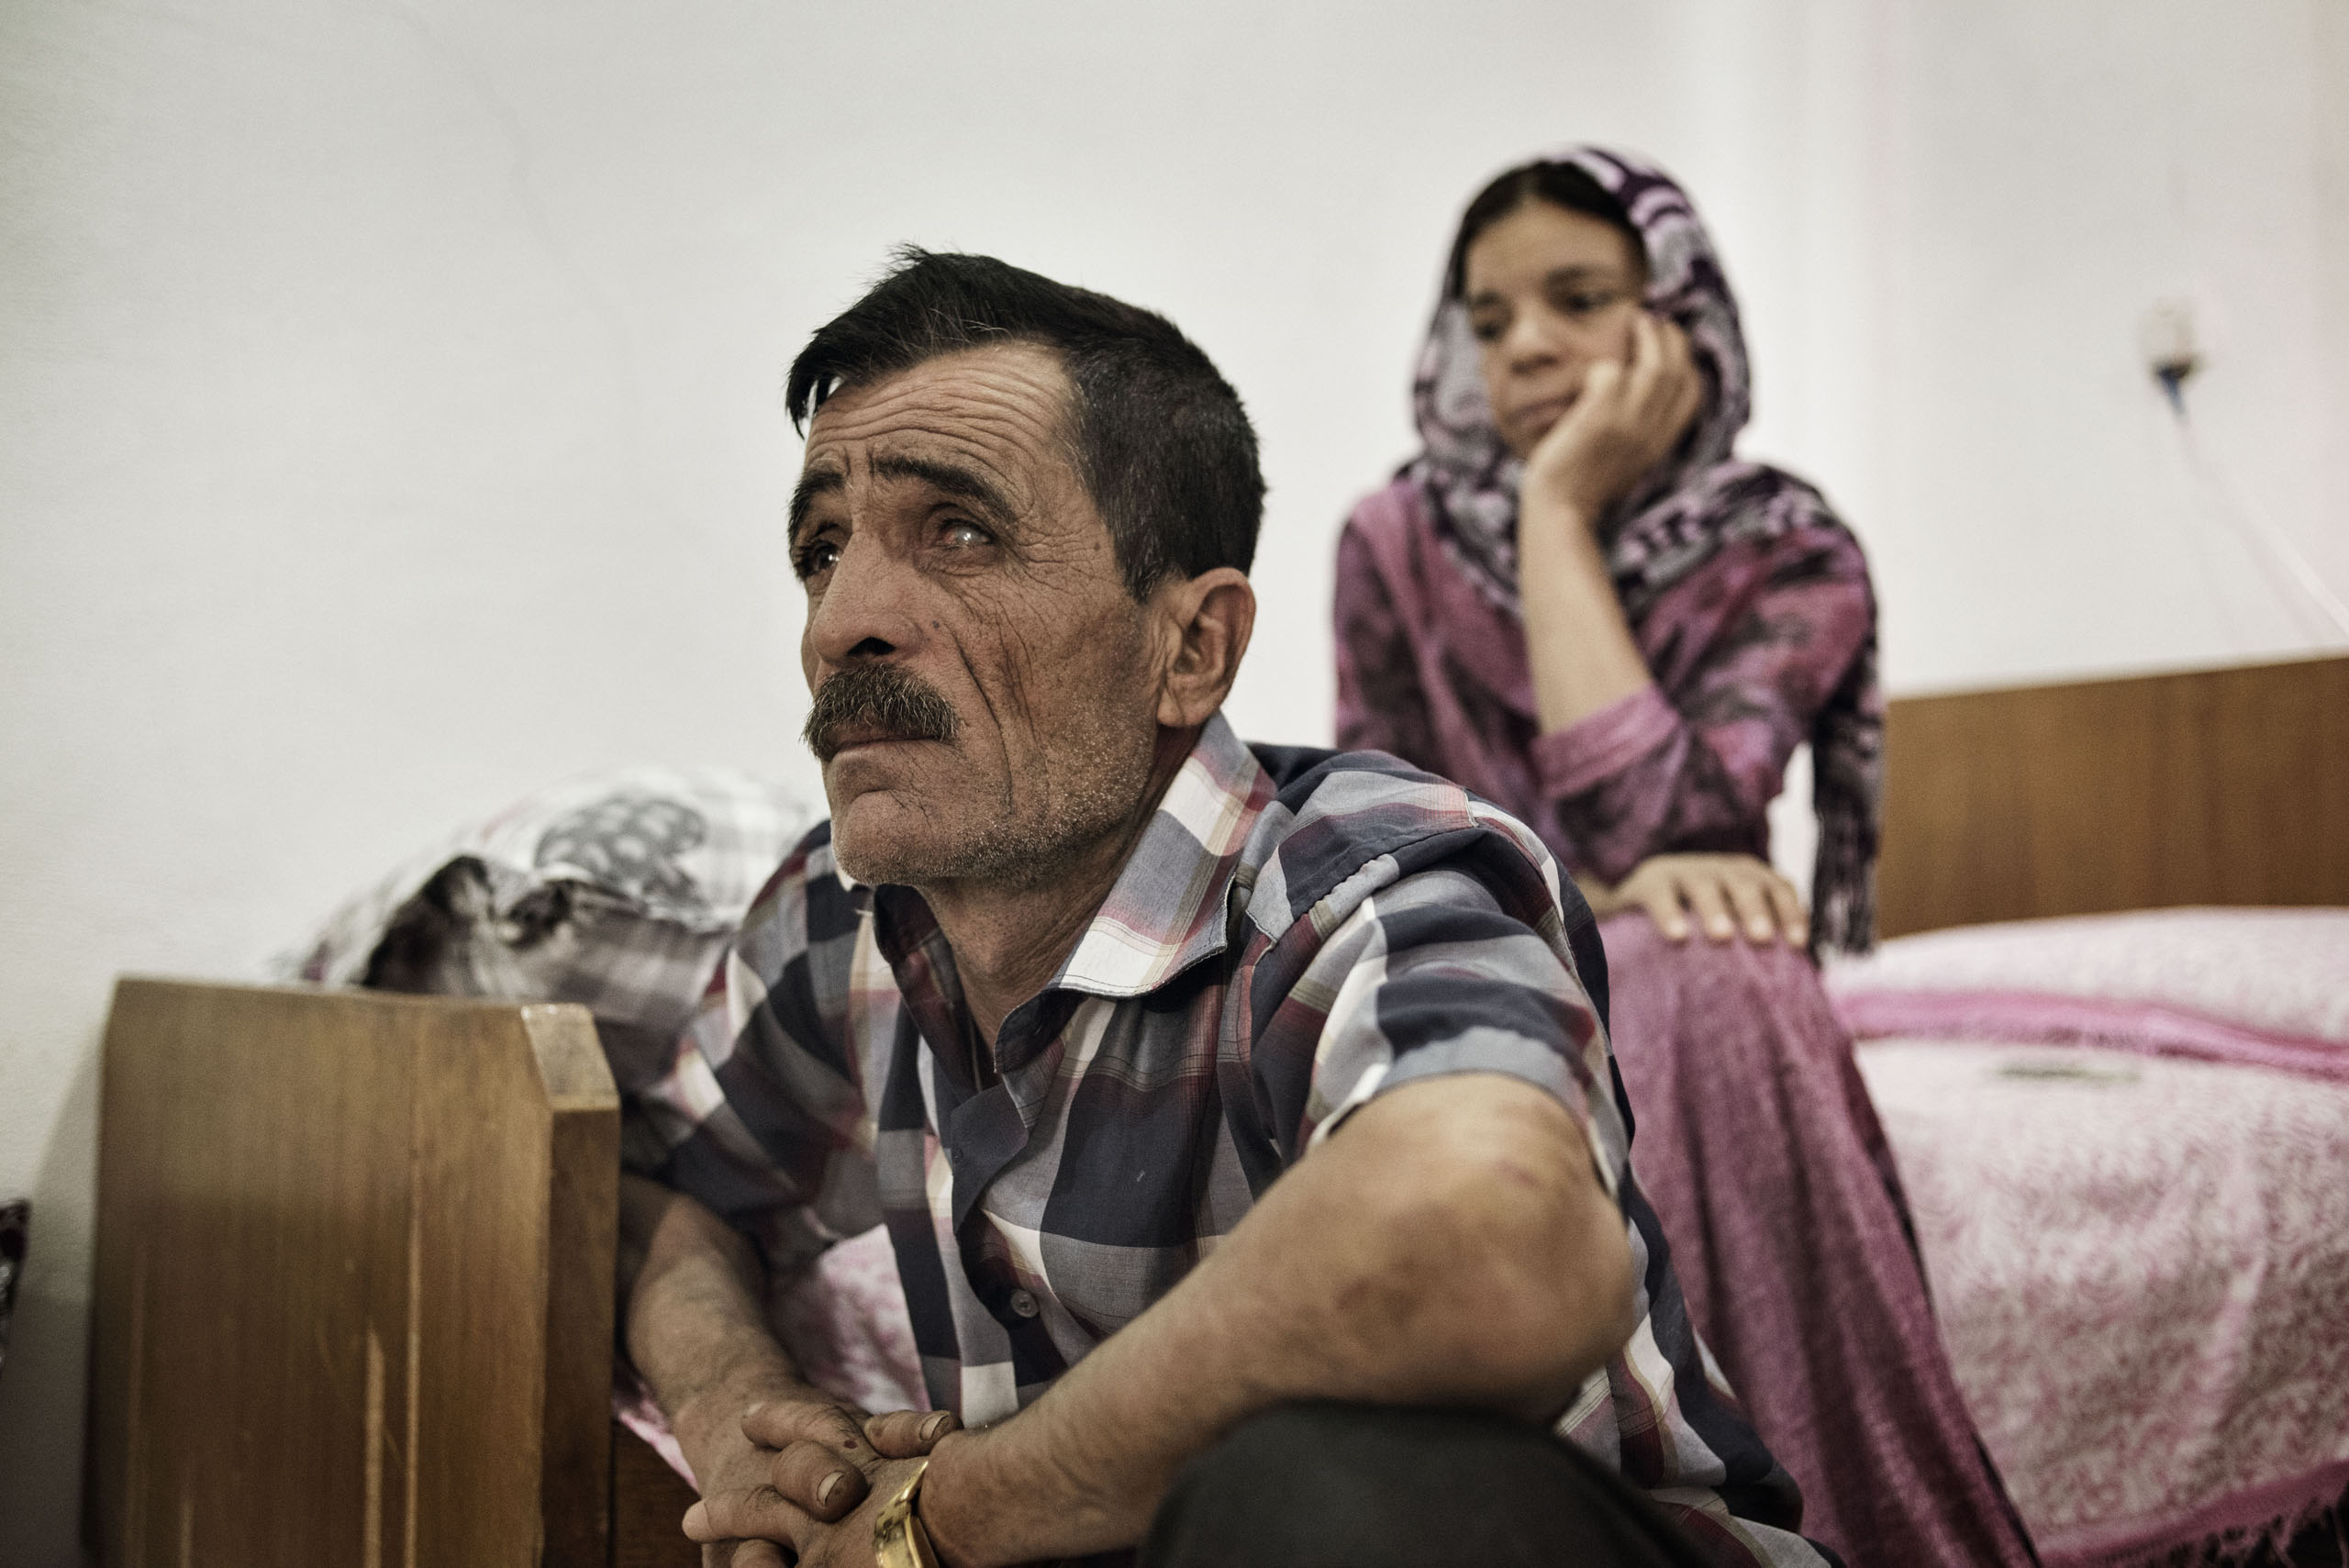 Khero Elias Khalad, 50, sits in an apartment in the Iraqi town of Sinjar,  May 13, 2016. Khalaf fled with his family when ISIS fighters overran the town in Aug. 2014. A shopkeeper, he has returned to live in Sinjar since it was recaptured by Kurdish armed forces in Nov. 2015.